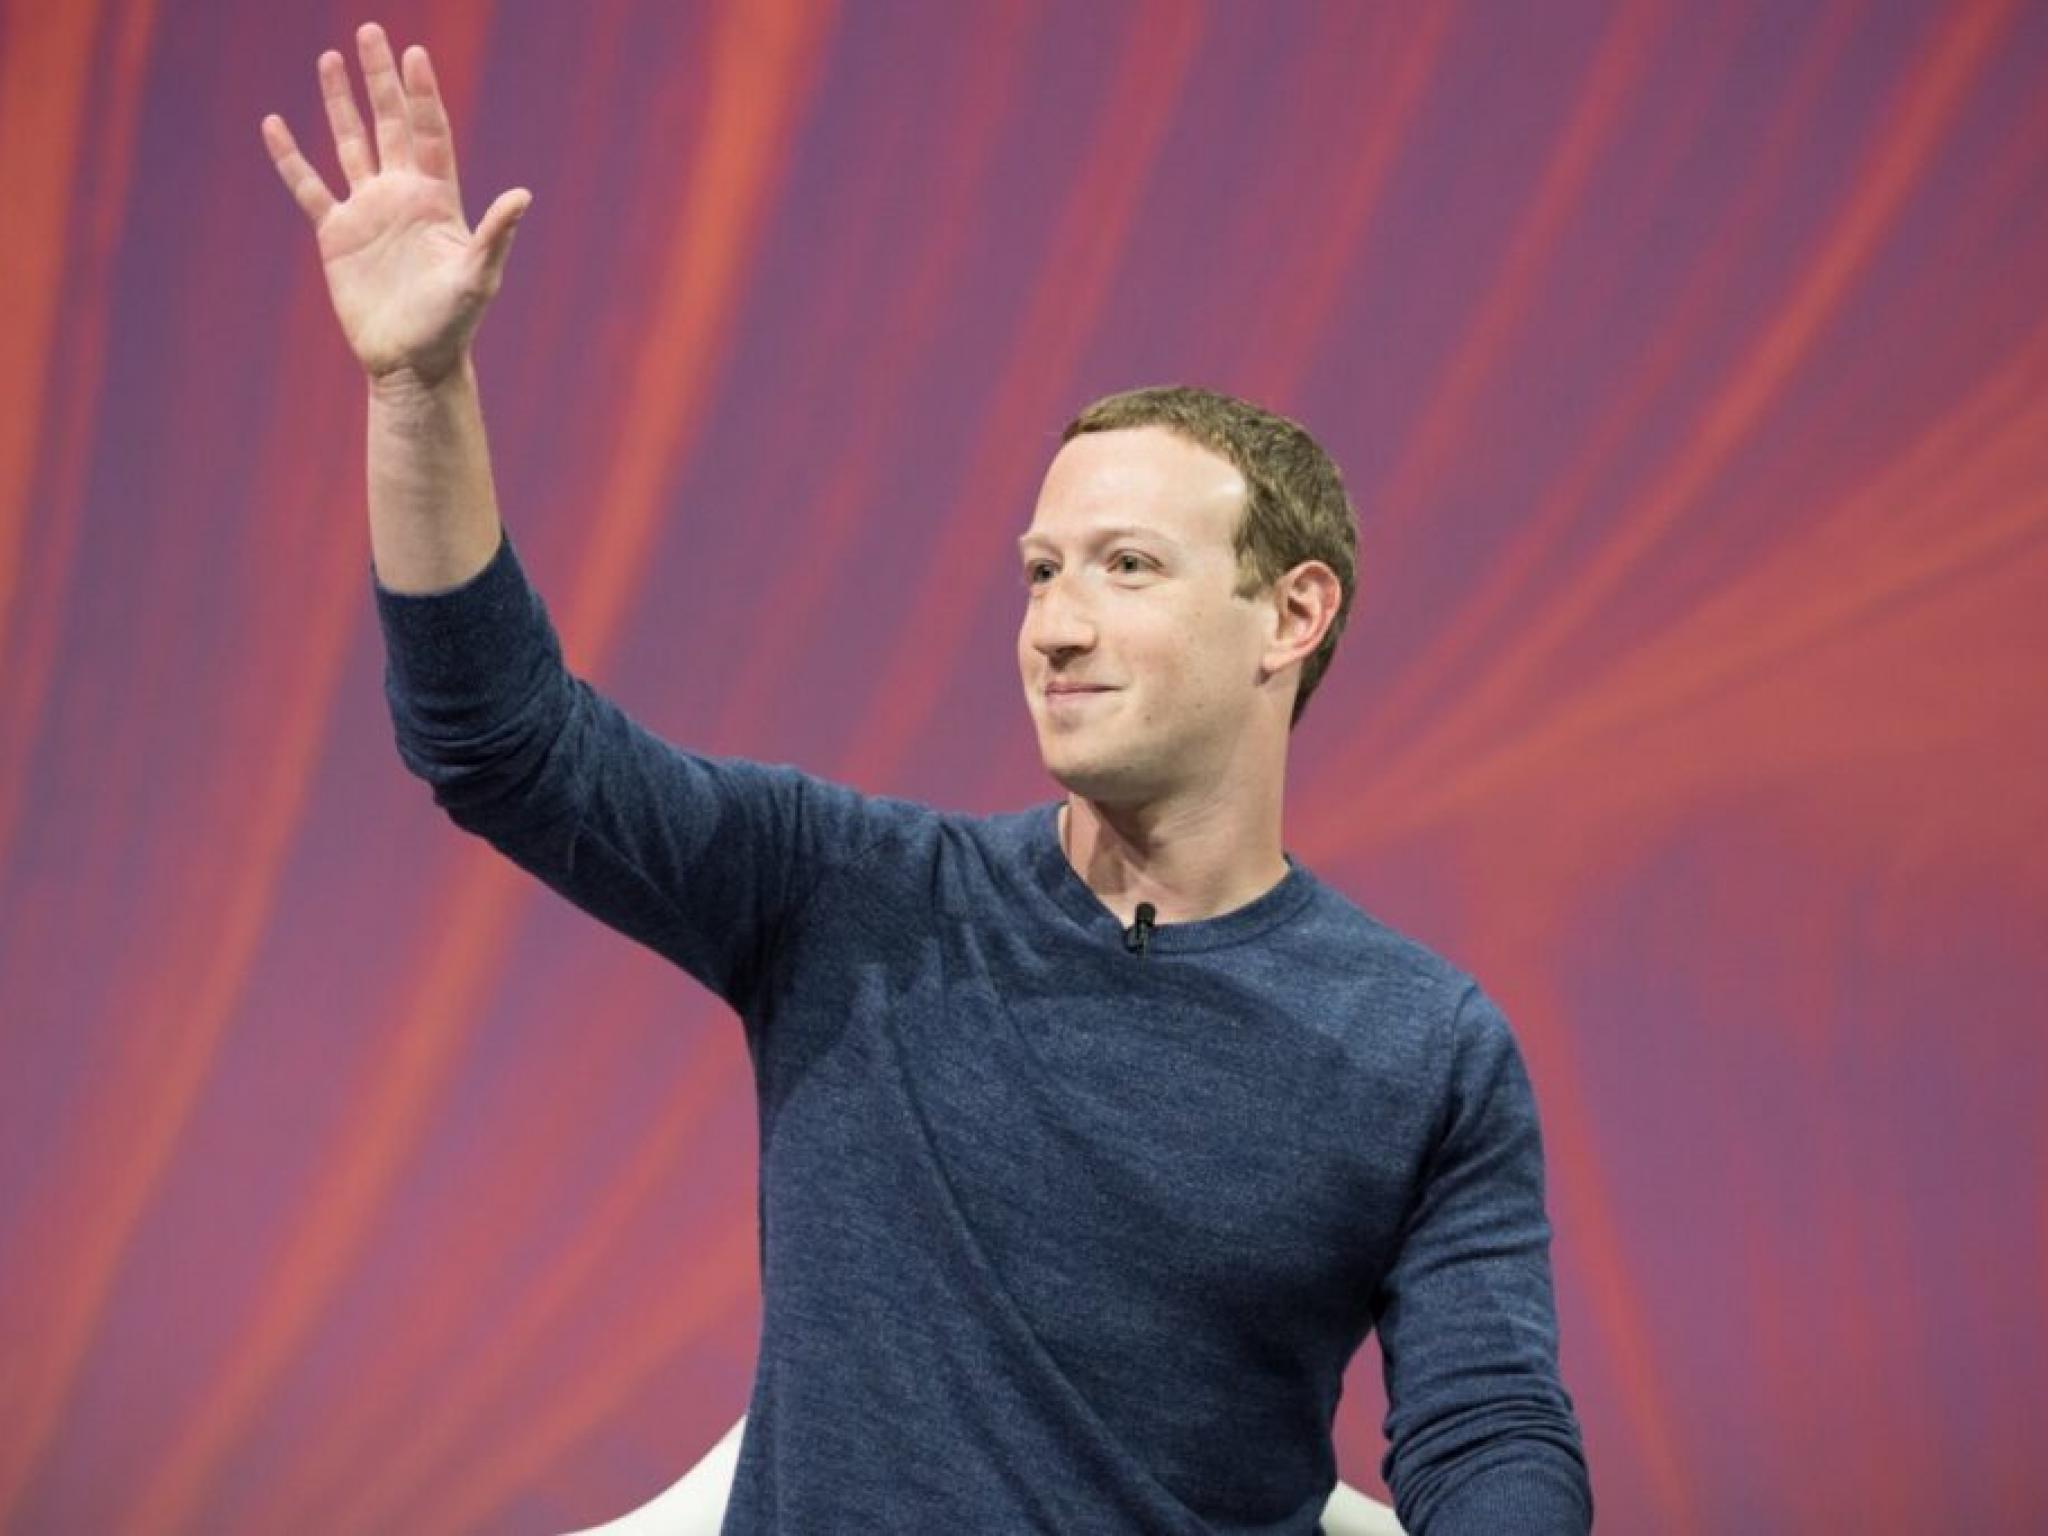  mark-zuckerberg-plans-massive-seven-building-compound-in-lake-tahoe-property-that-meta-ceo-quietly-acquired-for-59m-report 